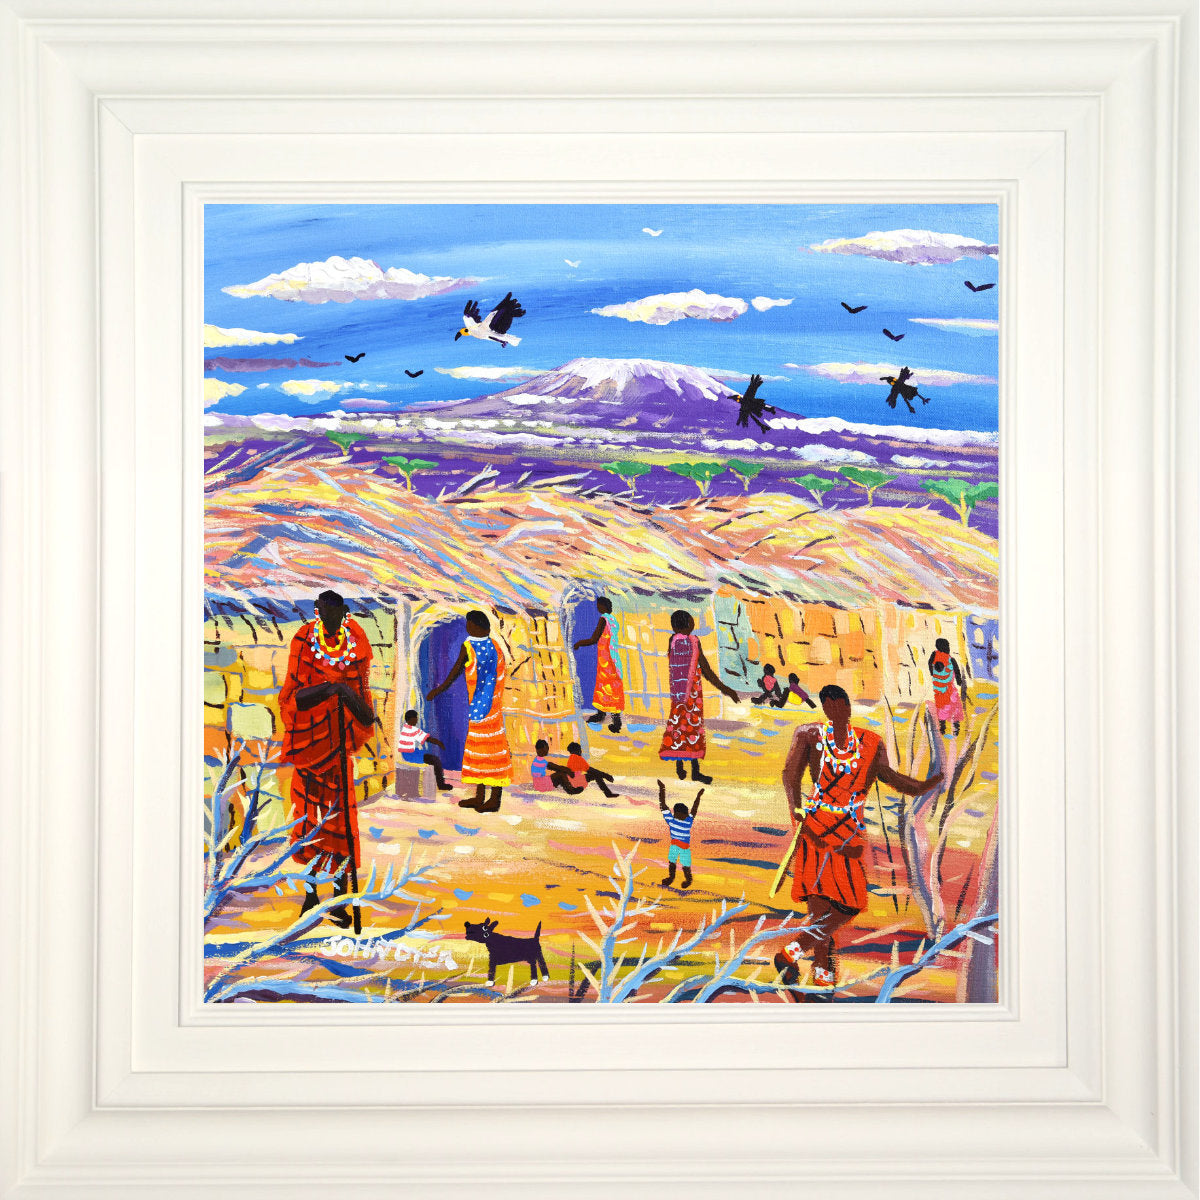 'A Day with the Maasai, Cultural Boma, Amboseli', 18x18 inches acrylic on canvas. African Painting by British Artist John Dyer.